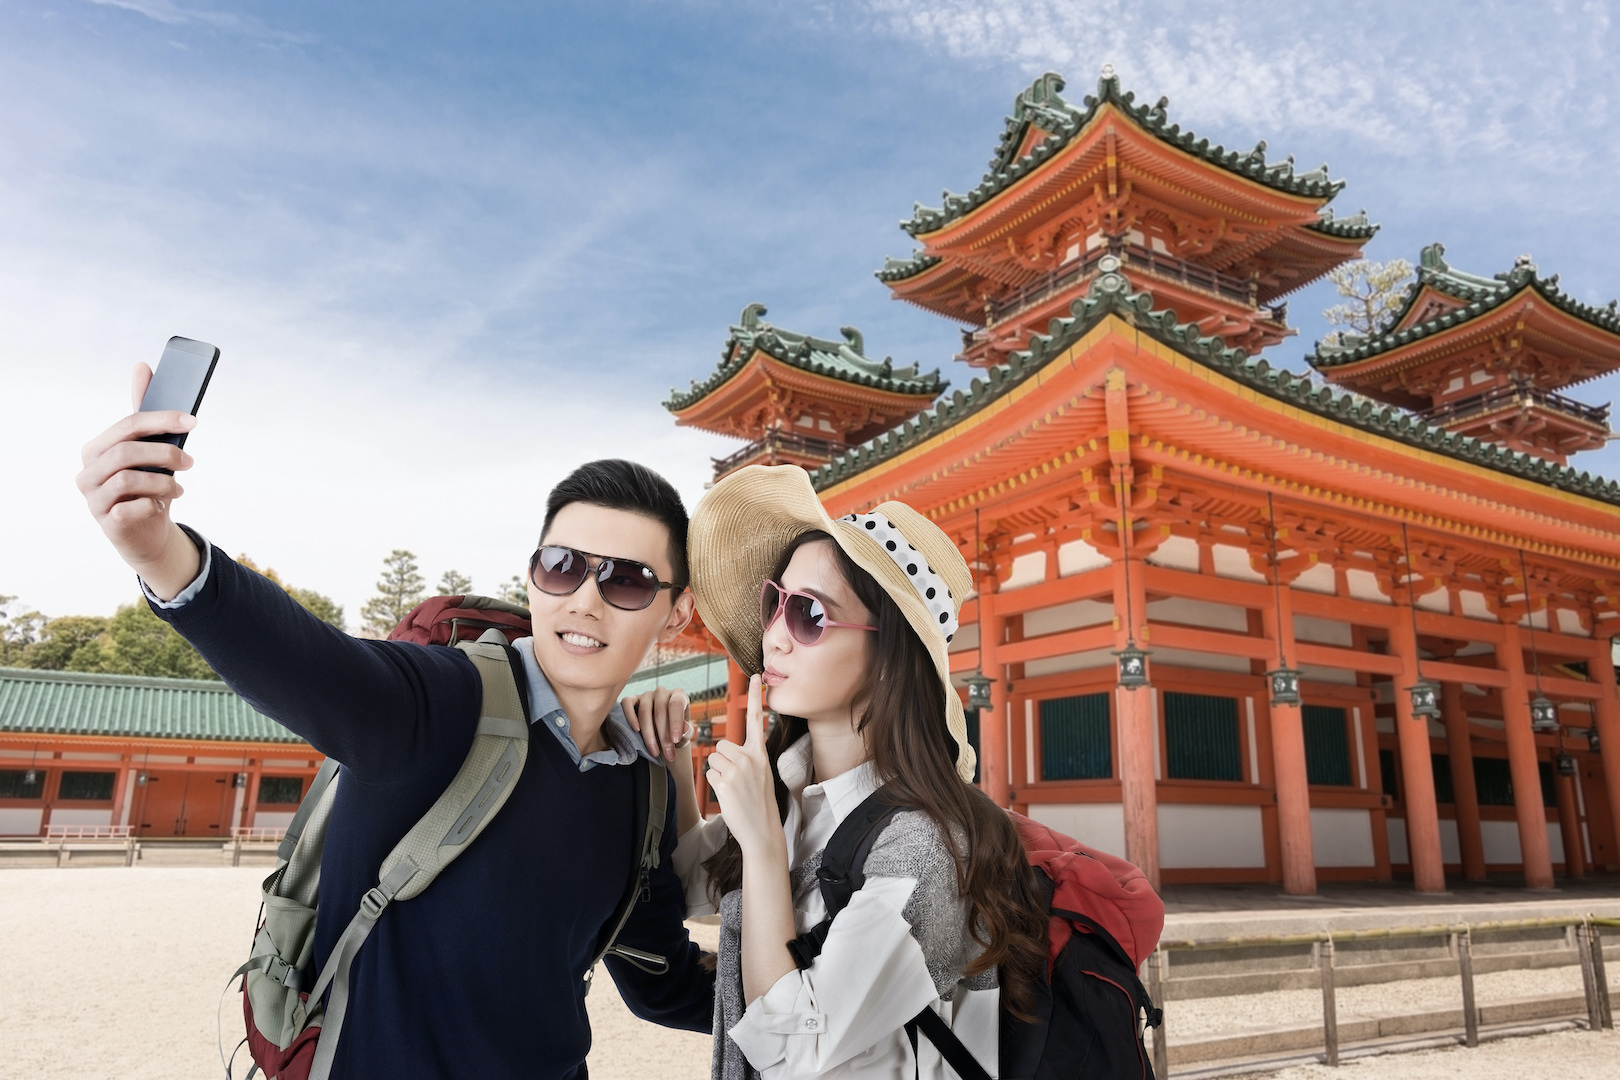 A young and fashionable Asian couple taking a selfie in front of the Heian Shrine, Kyoto, Japan.